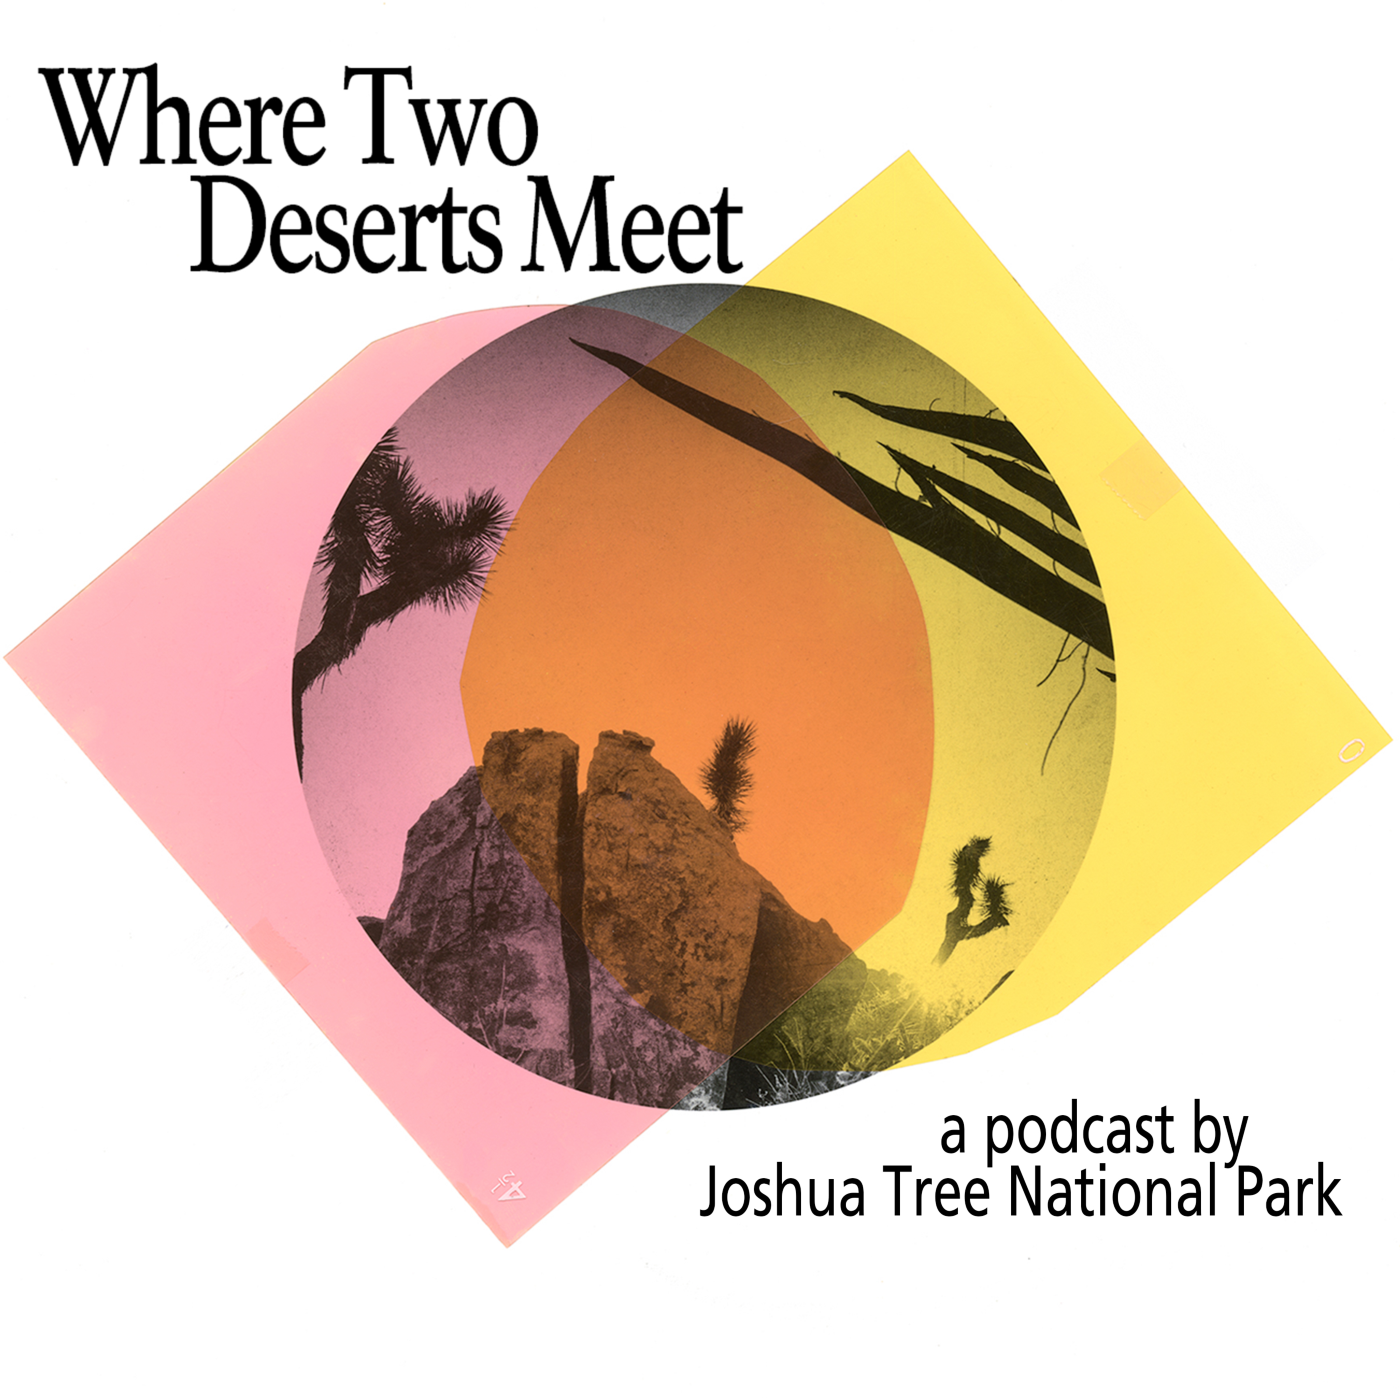 The official logo for Where Two Deserts Meet with a photo of the park & an overlay of pink & yellow